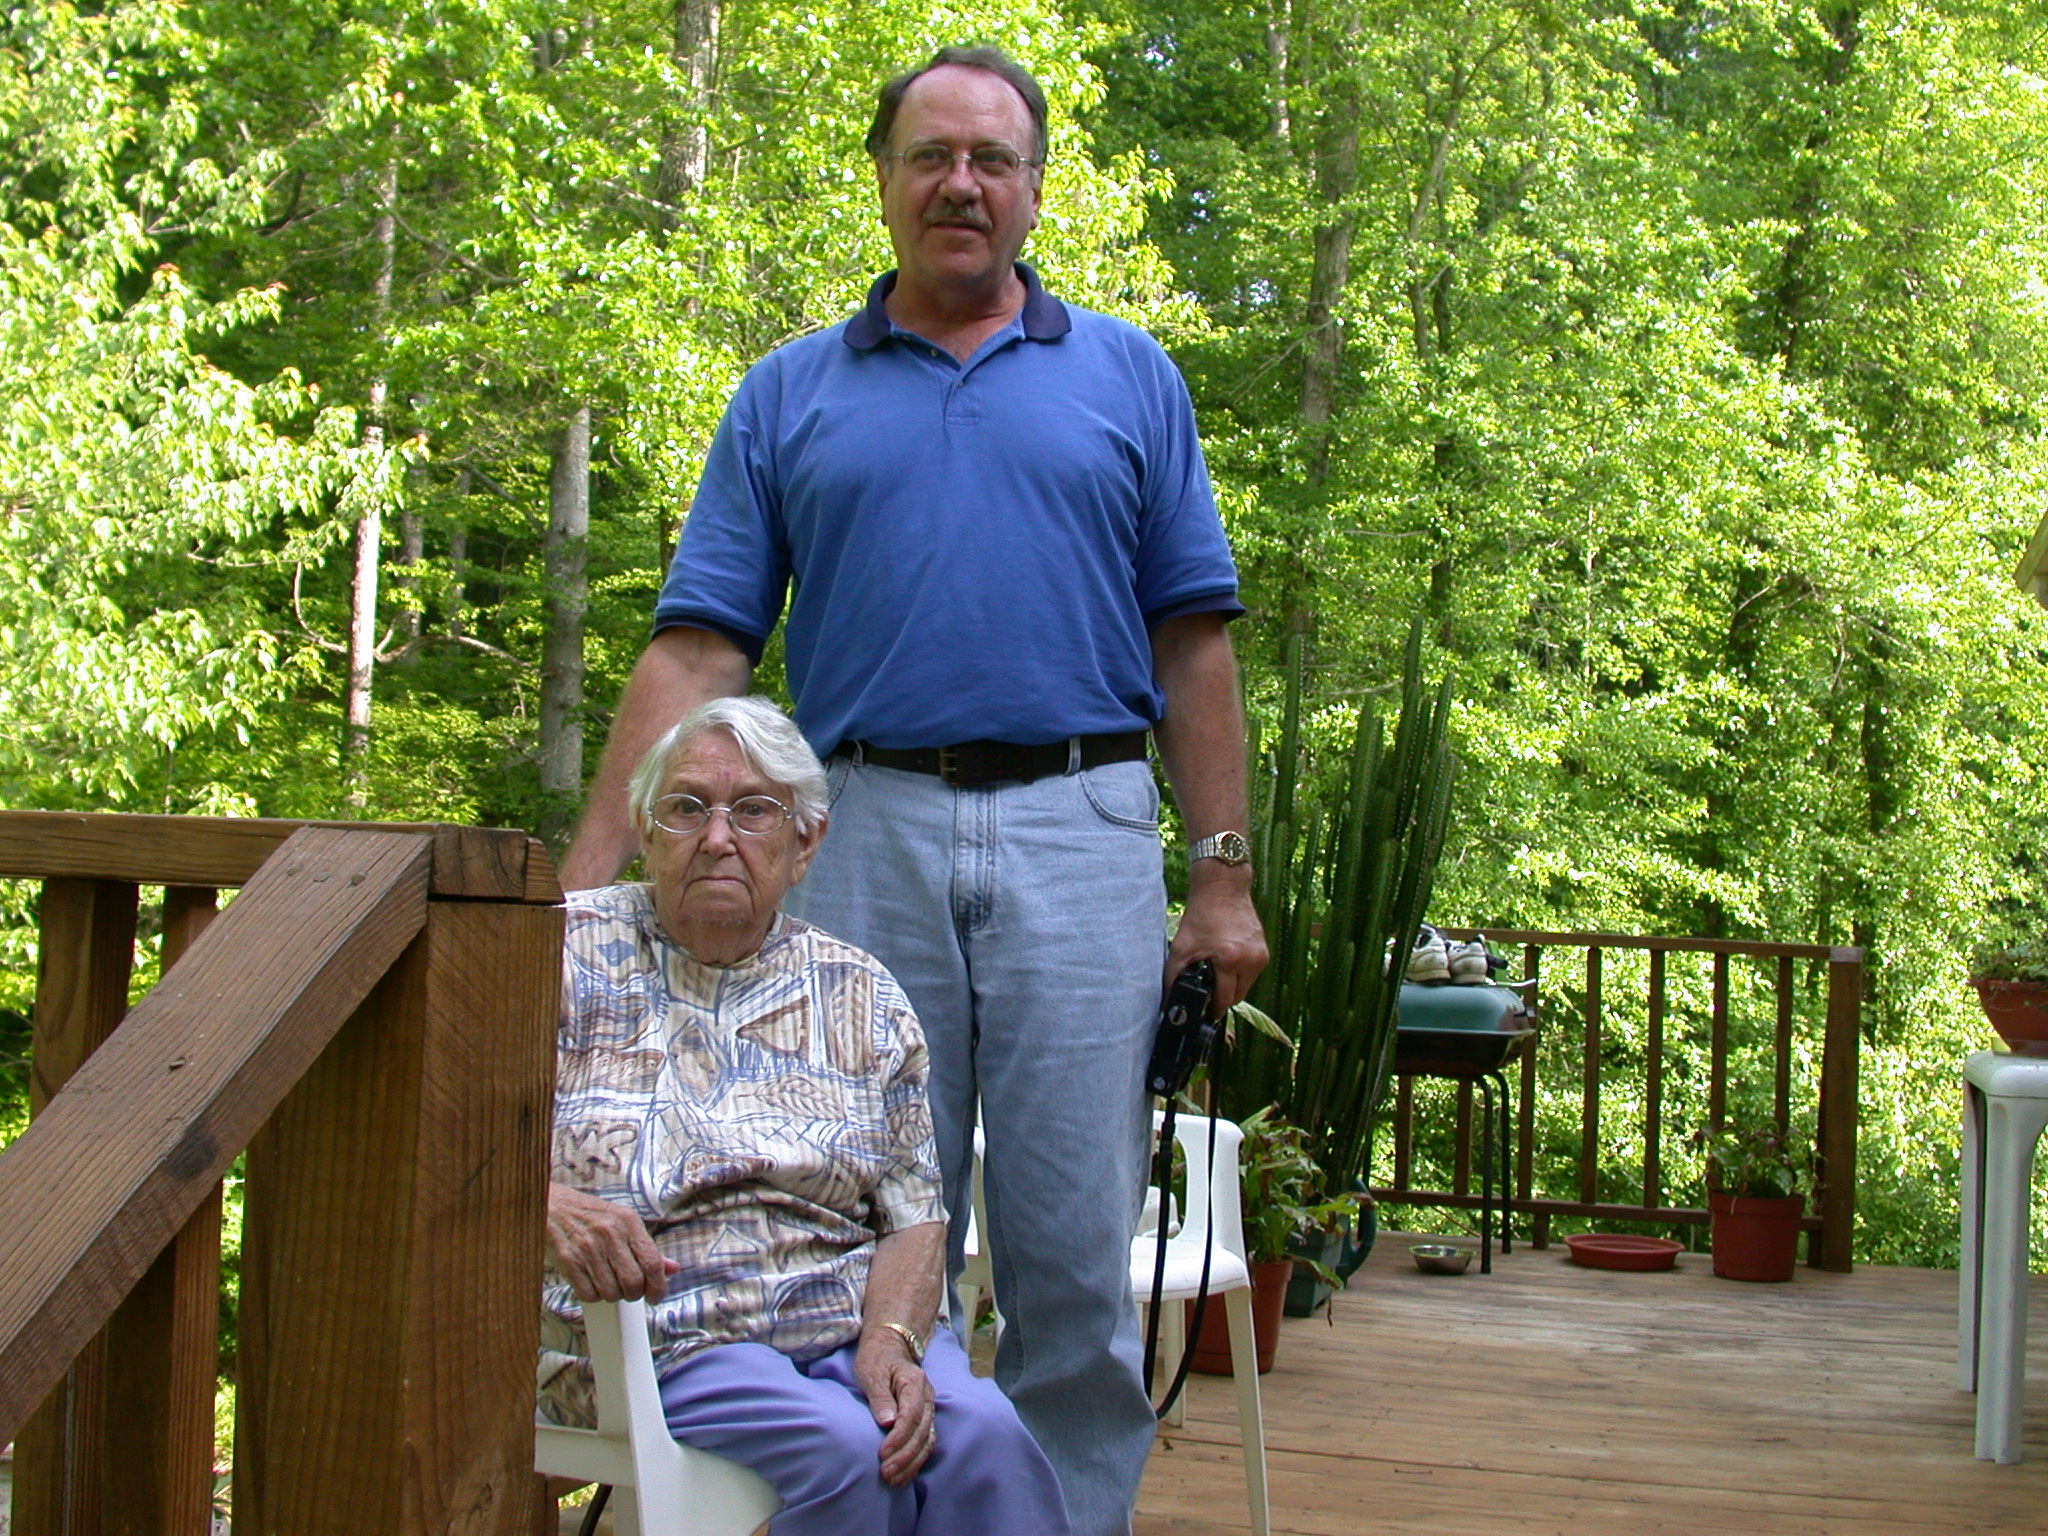 John Allen Berry and Roxie Berry 2005